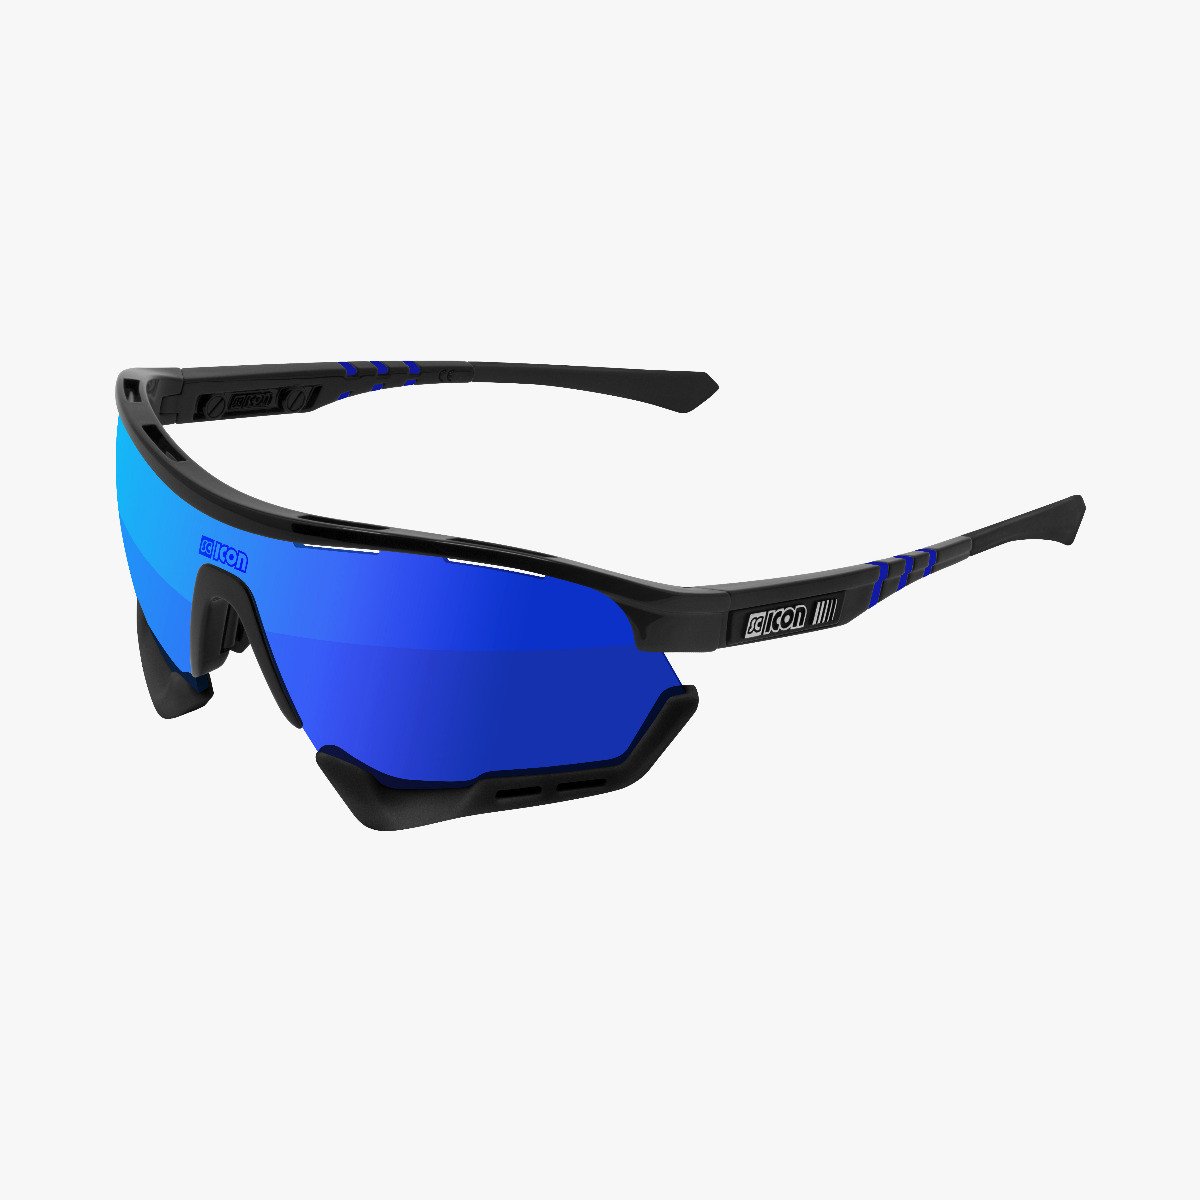 Scicon Sports | Aerotech Sport Cycling Performance Sunglasses - Black / Blue - EY13030202